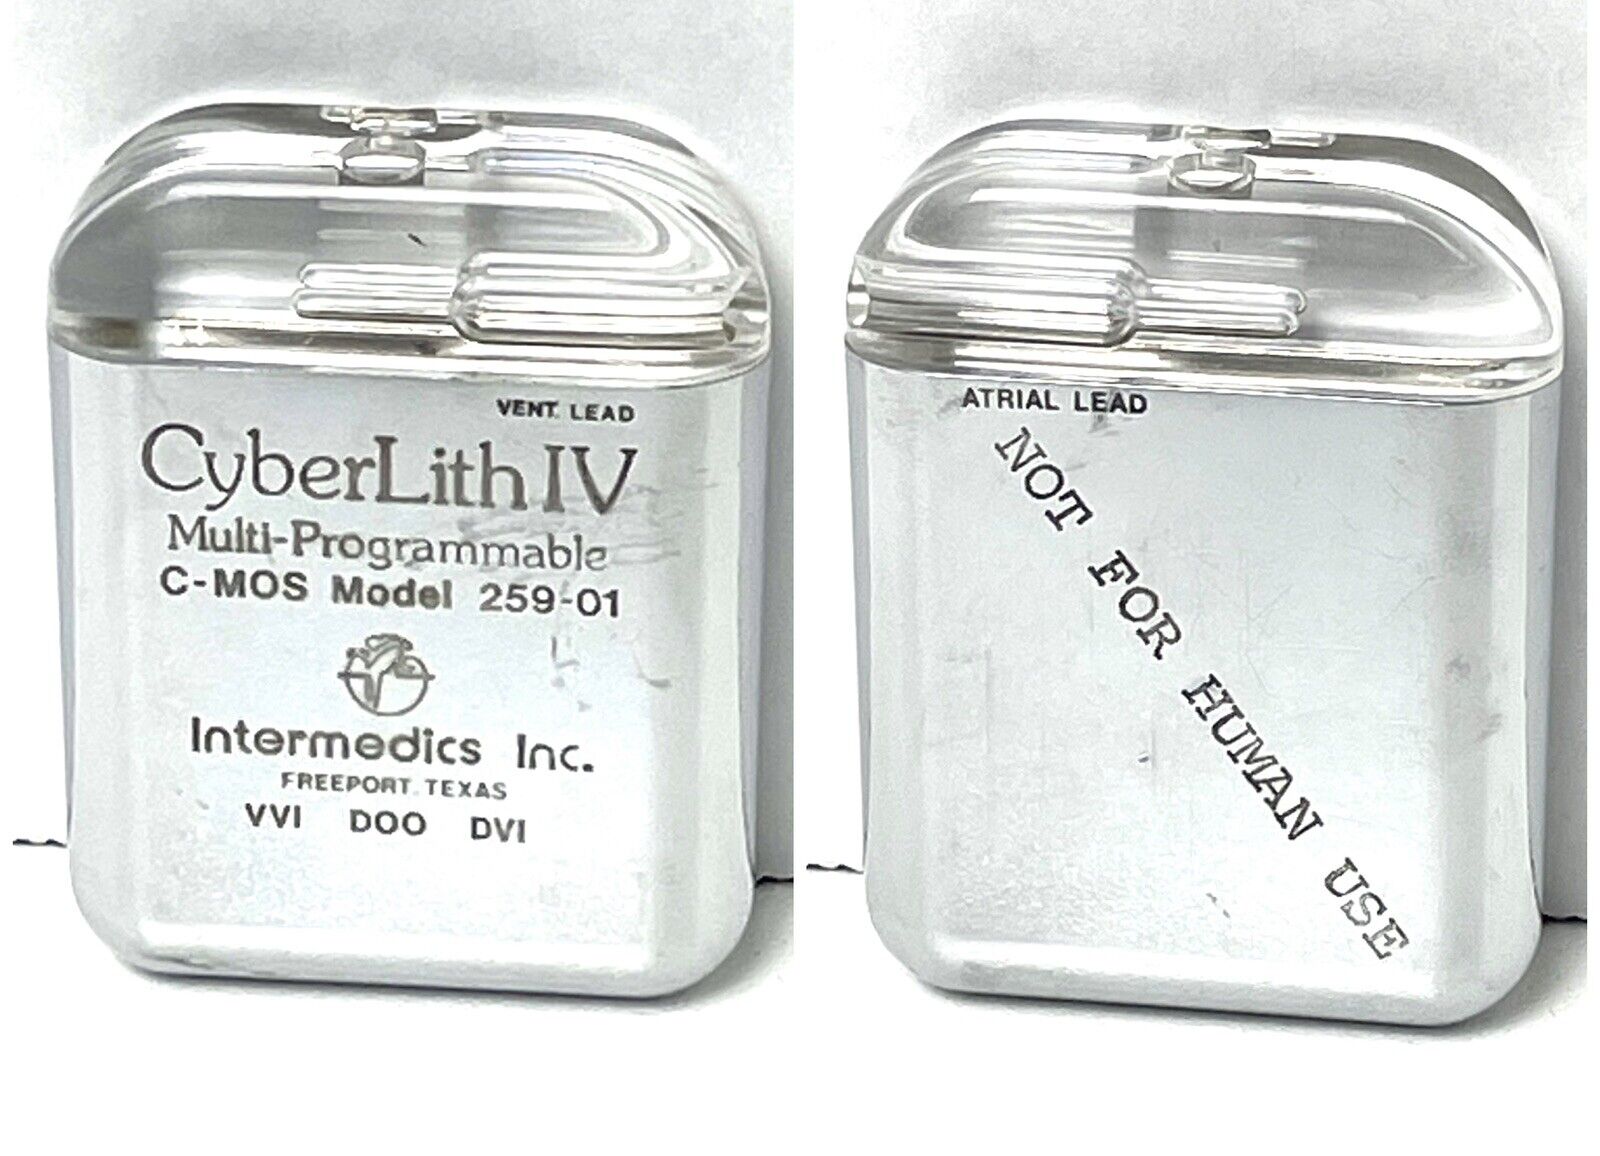 Vintage COLLECTIBLE ONLY CyberLith IV Intermedics Medical Collectible 259-01.